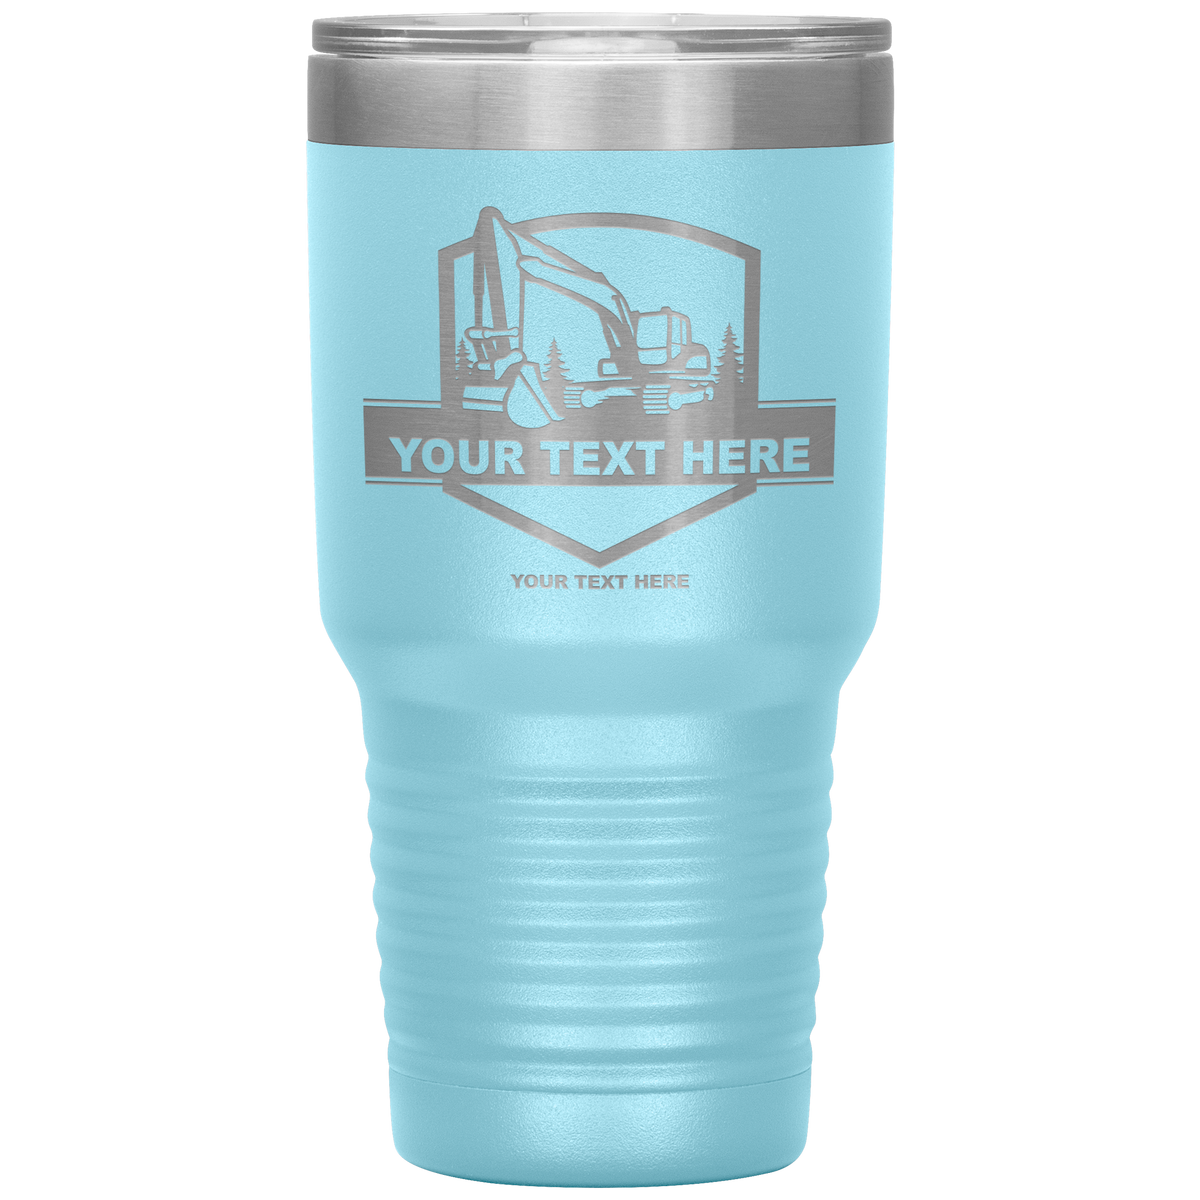 Excavator Trees Your Text Here 30oz Tumbler Free Shipping